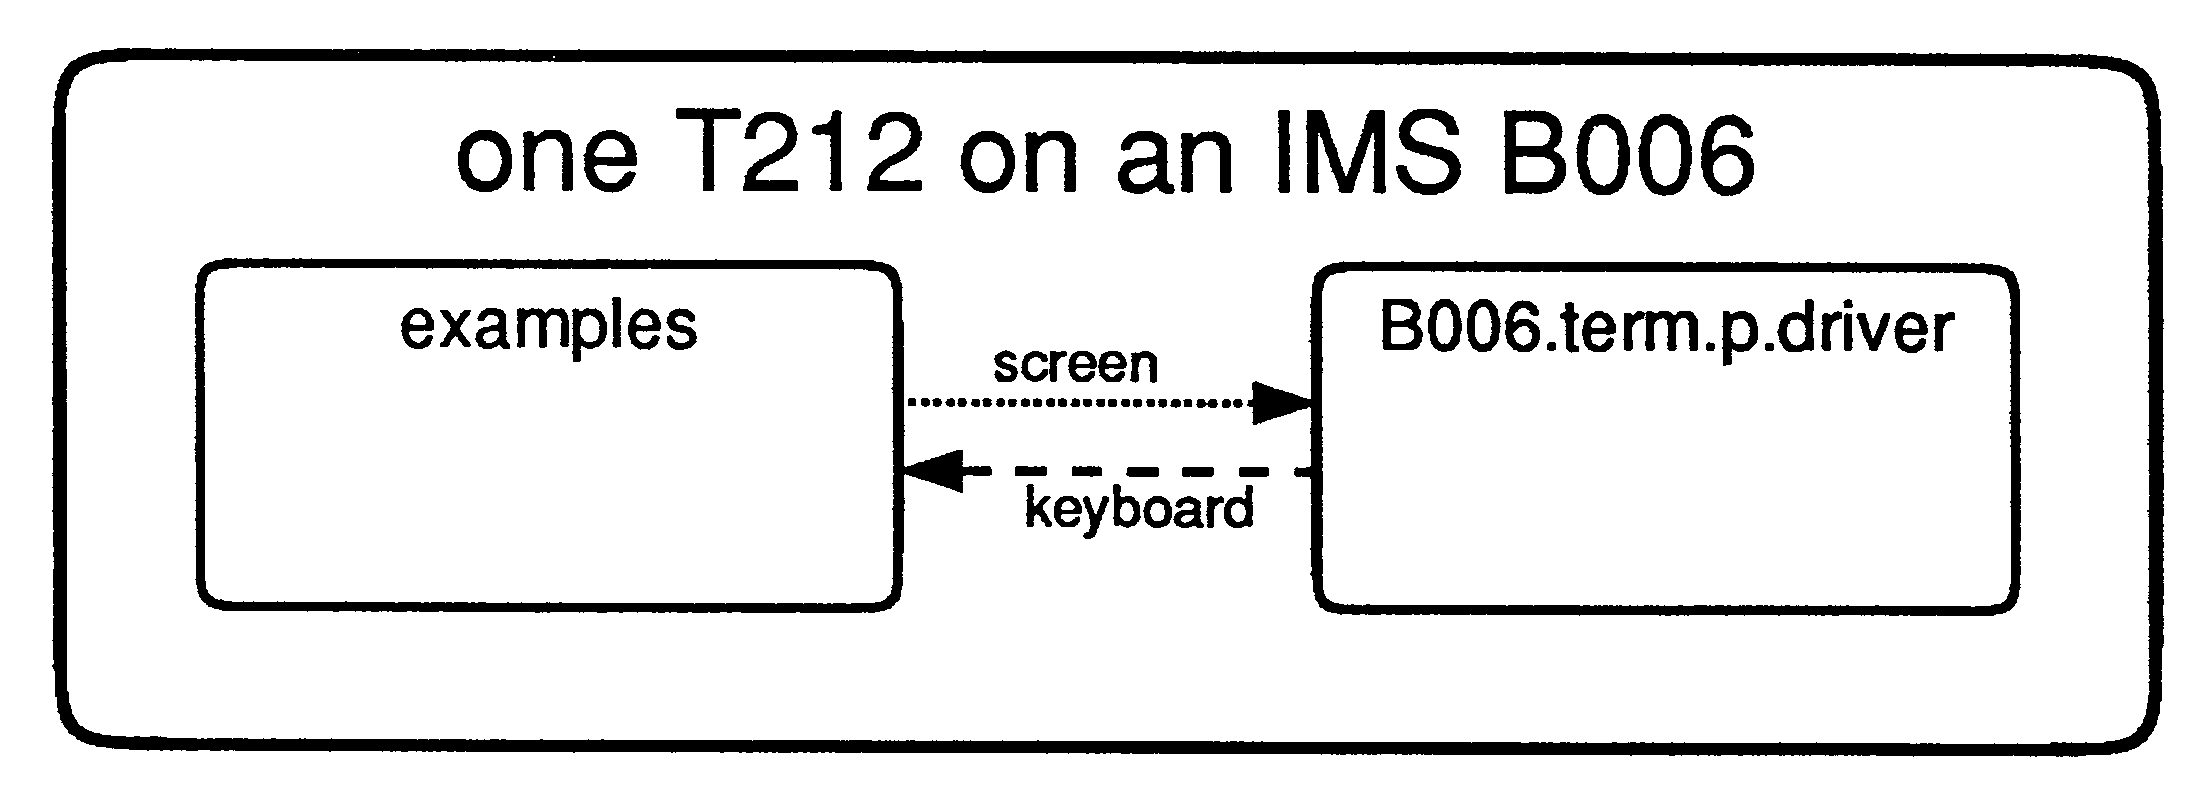 One T212 on an IMS B006